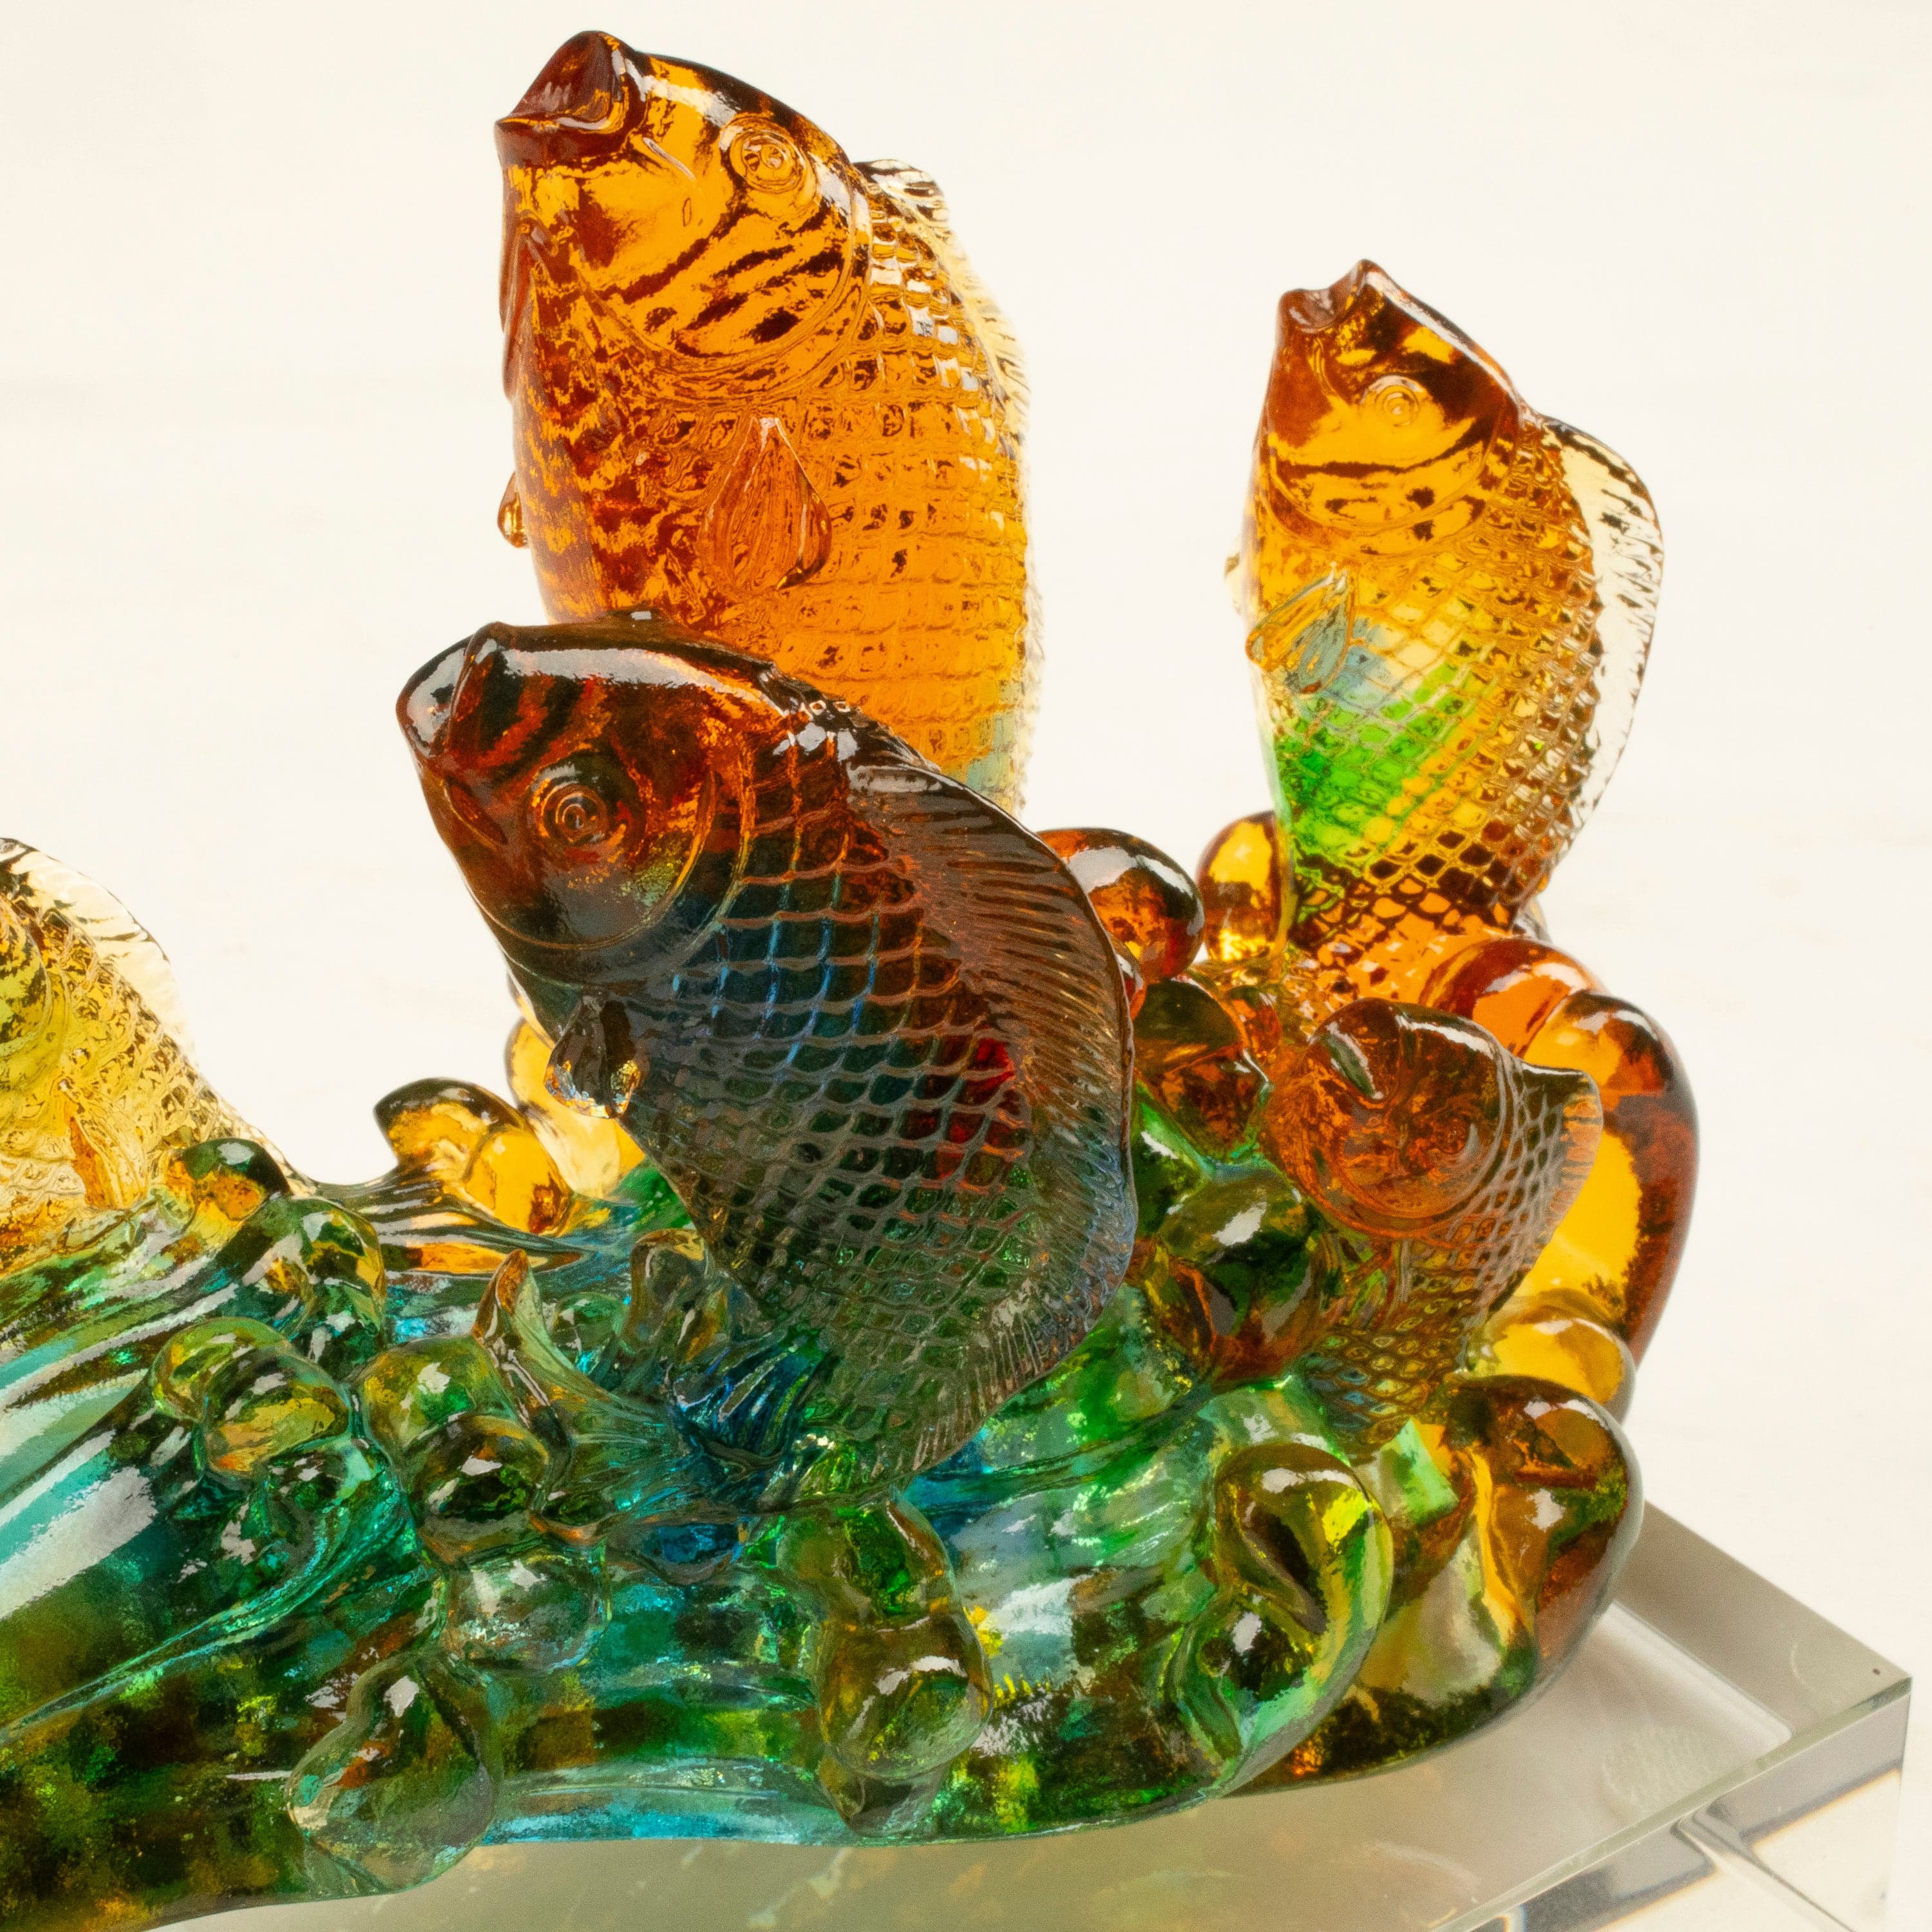 Kalifano Crystal Carving Glorious Fish Stream Crystal Carving - A Symbol of Abundance and Prosperity CR330-RUI